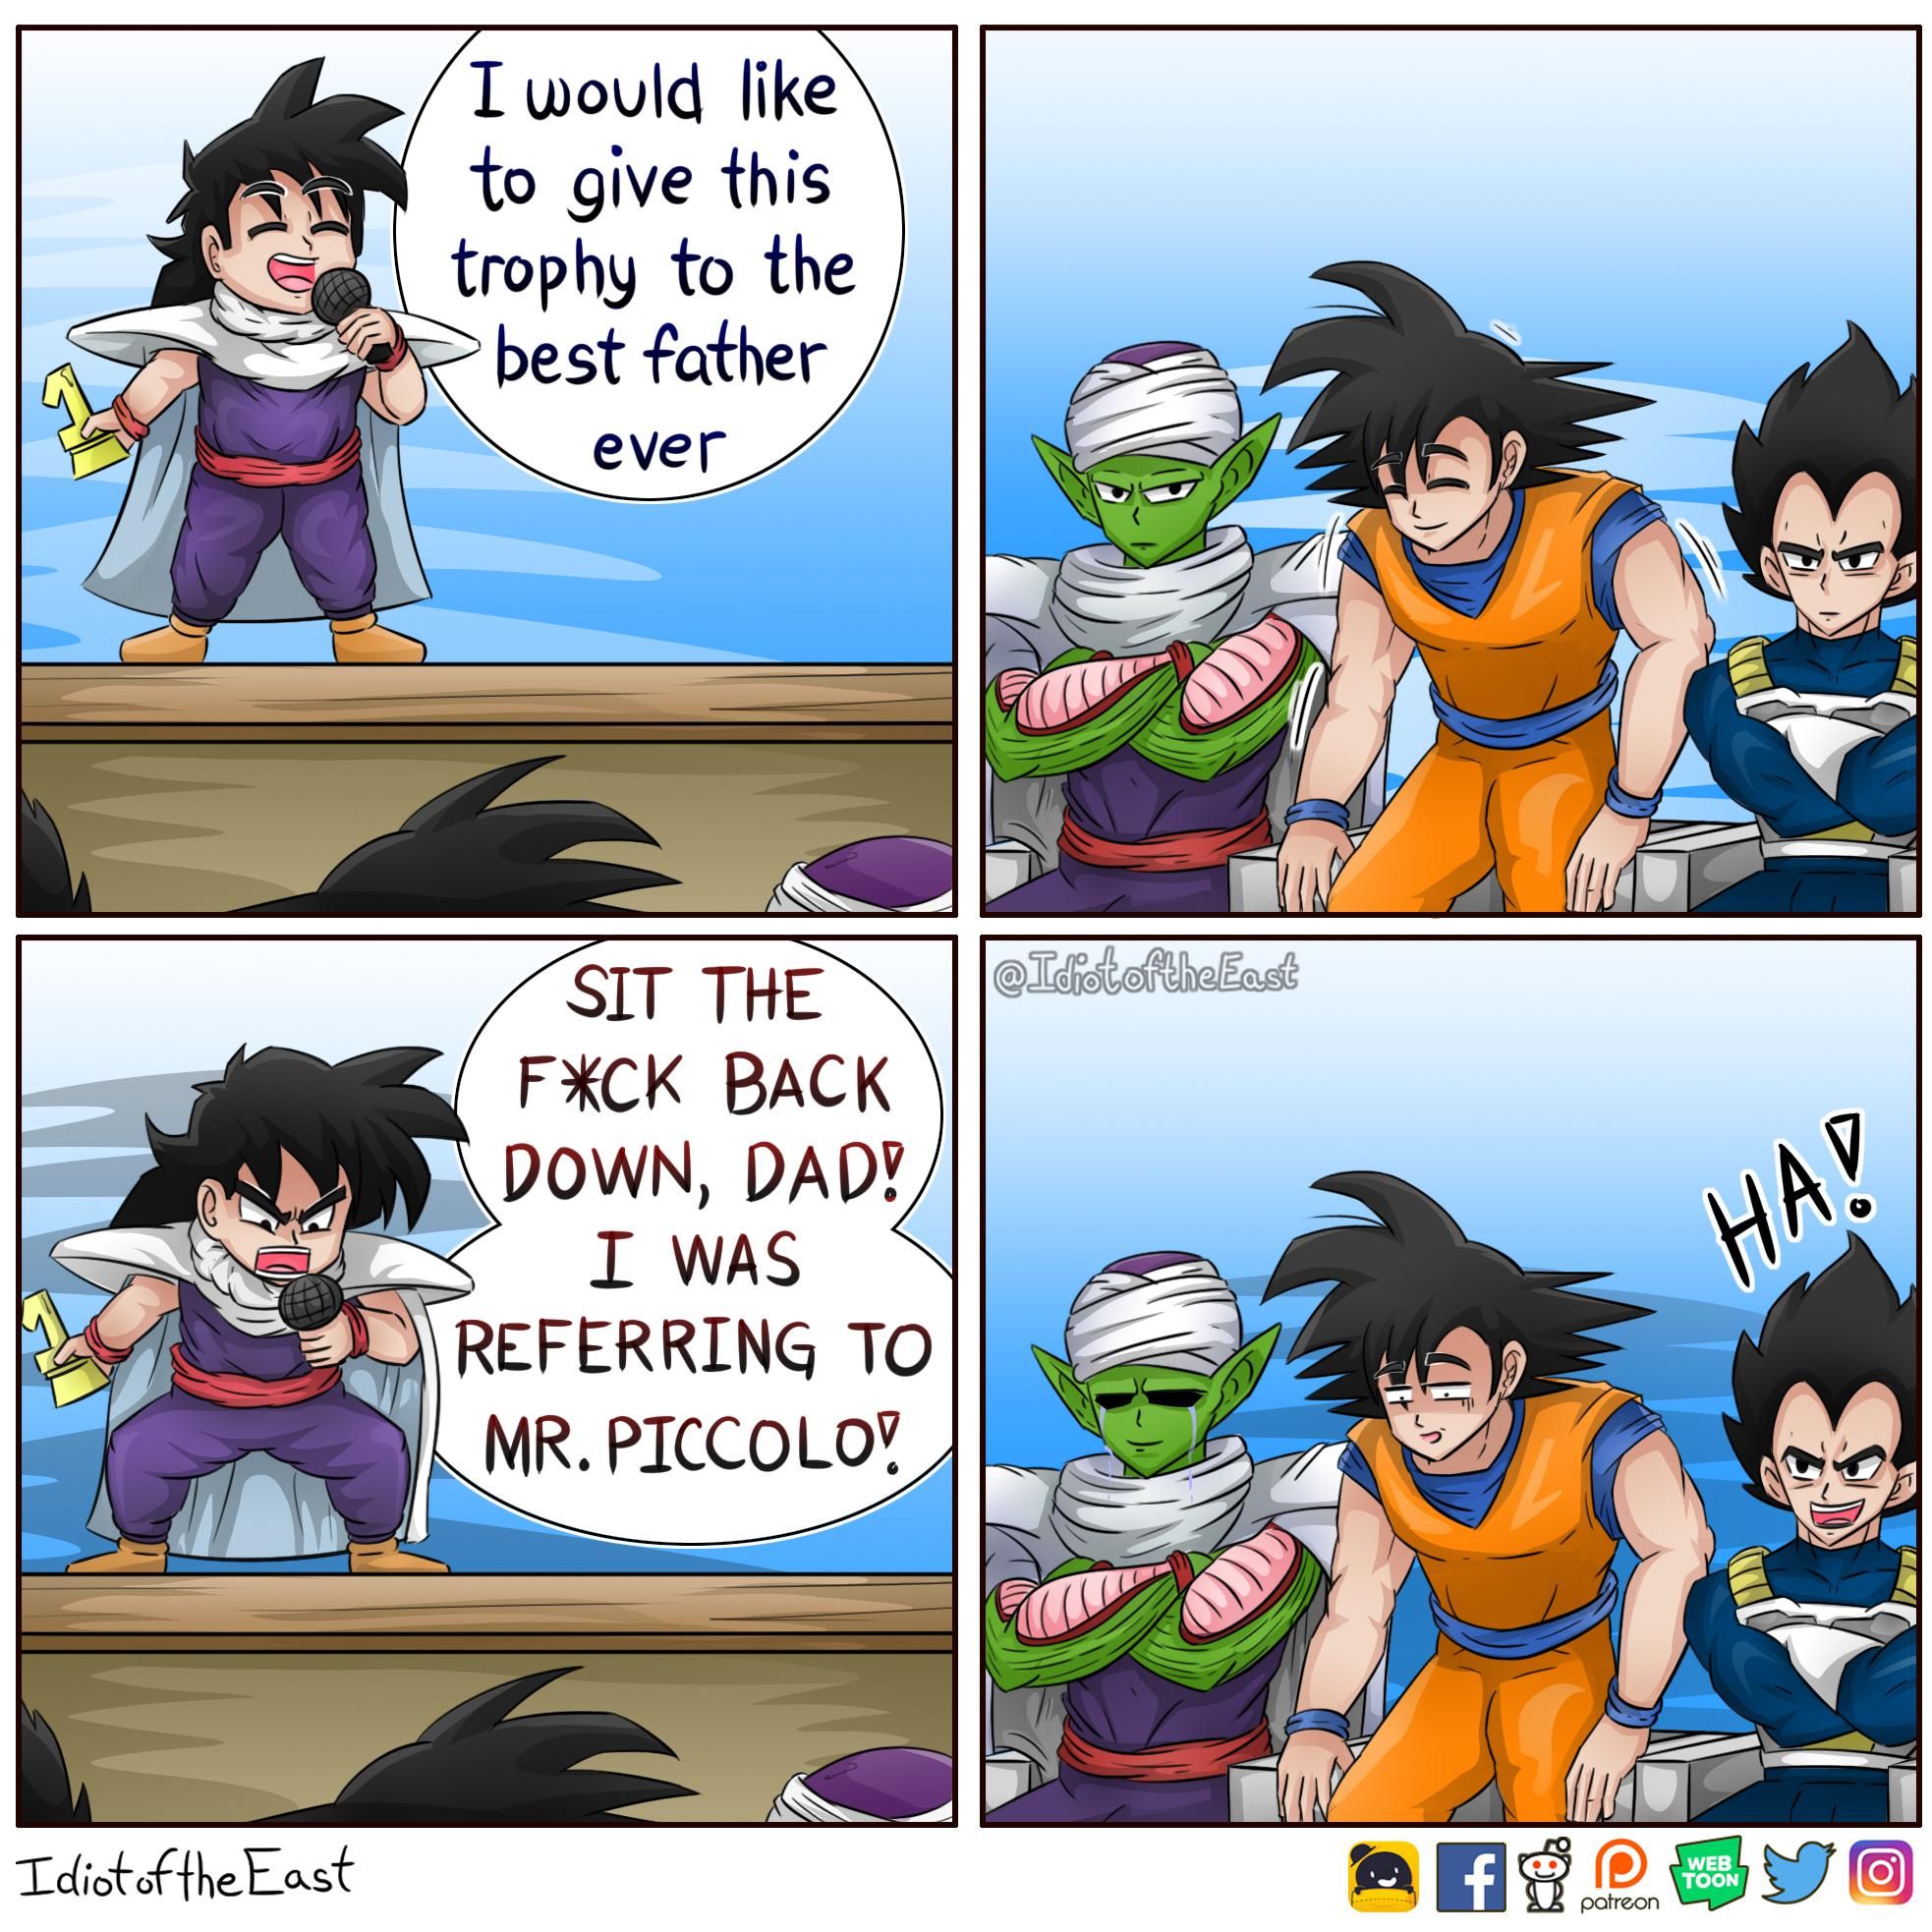 Piccolo: he may have been your father, boy, but he wasn't your daddy